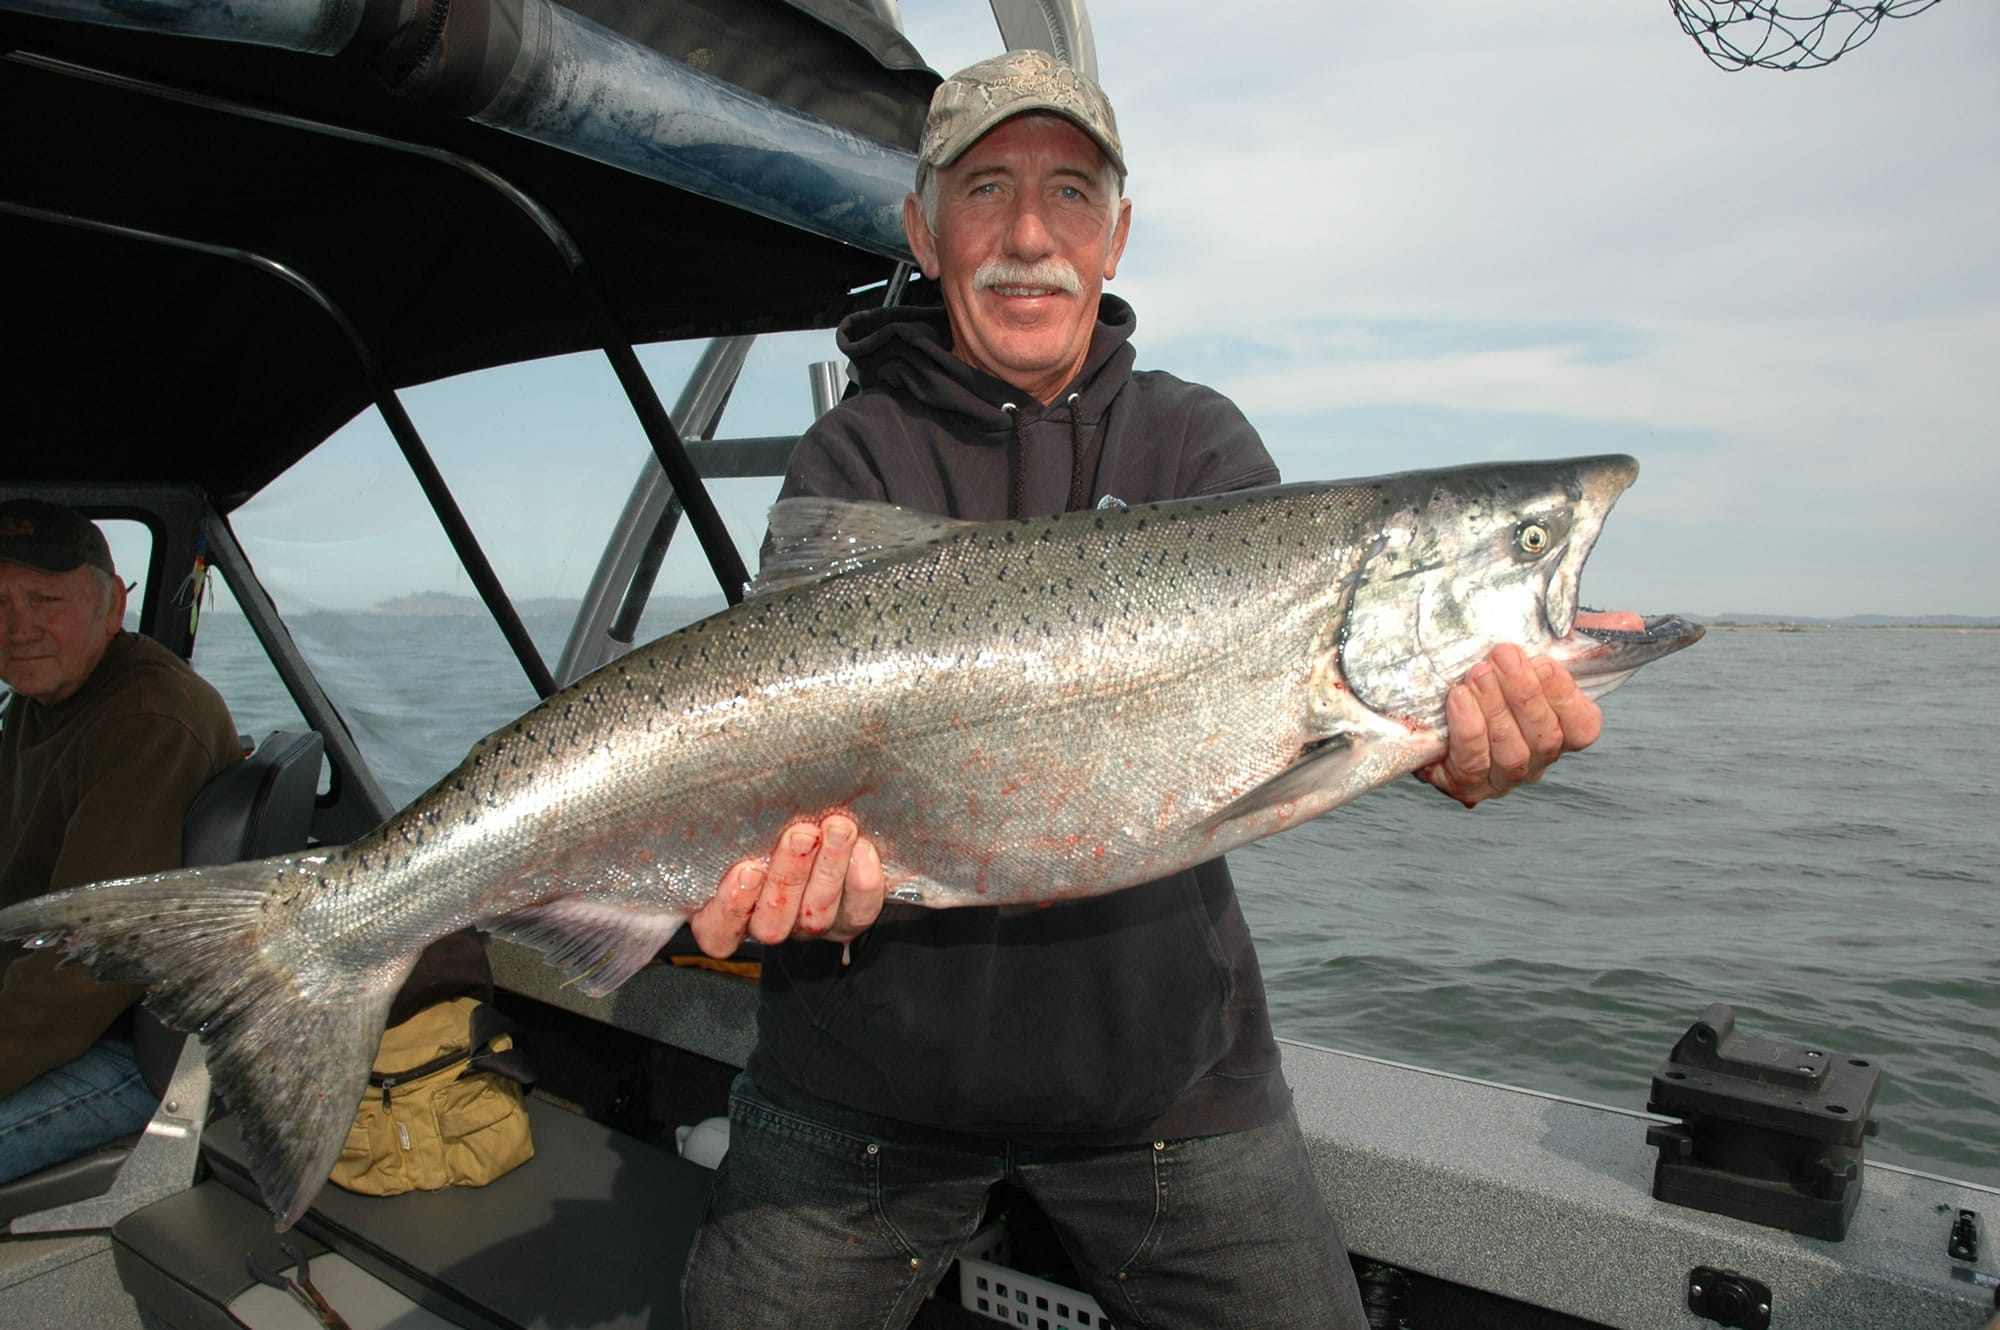 Keith Martin of Greshman with a fin-clipped chinook caught at Buoy 10.